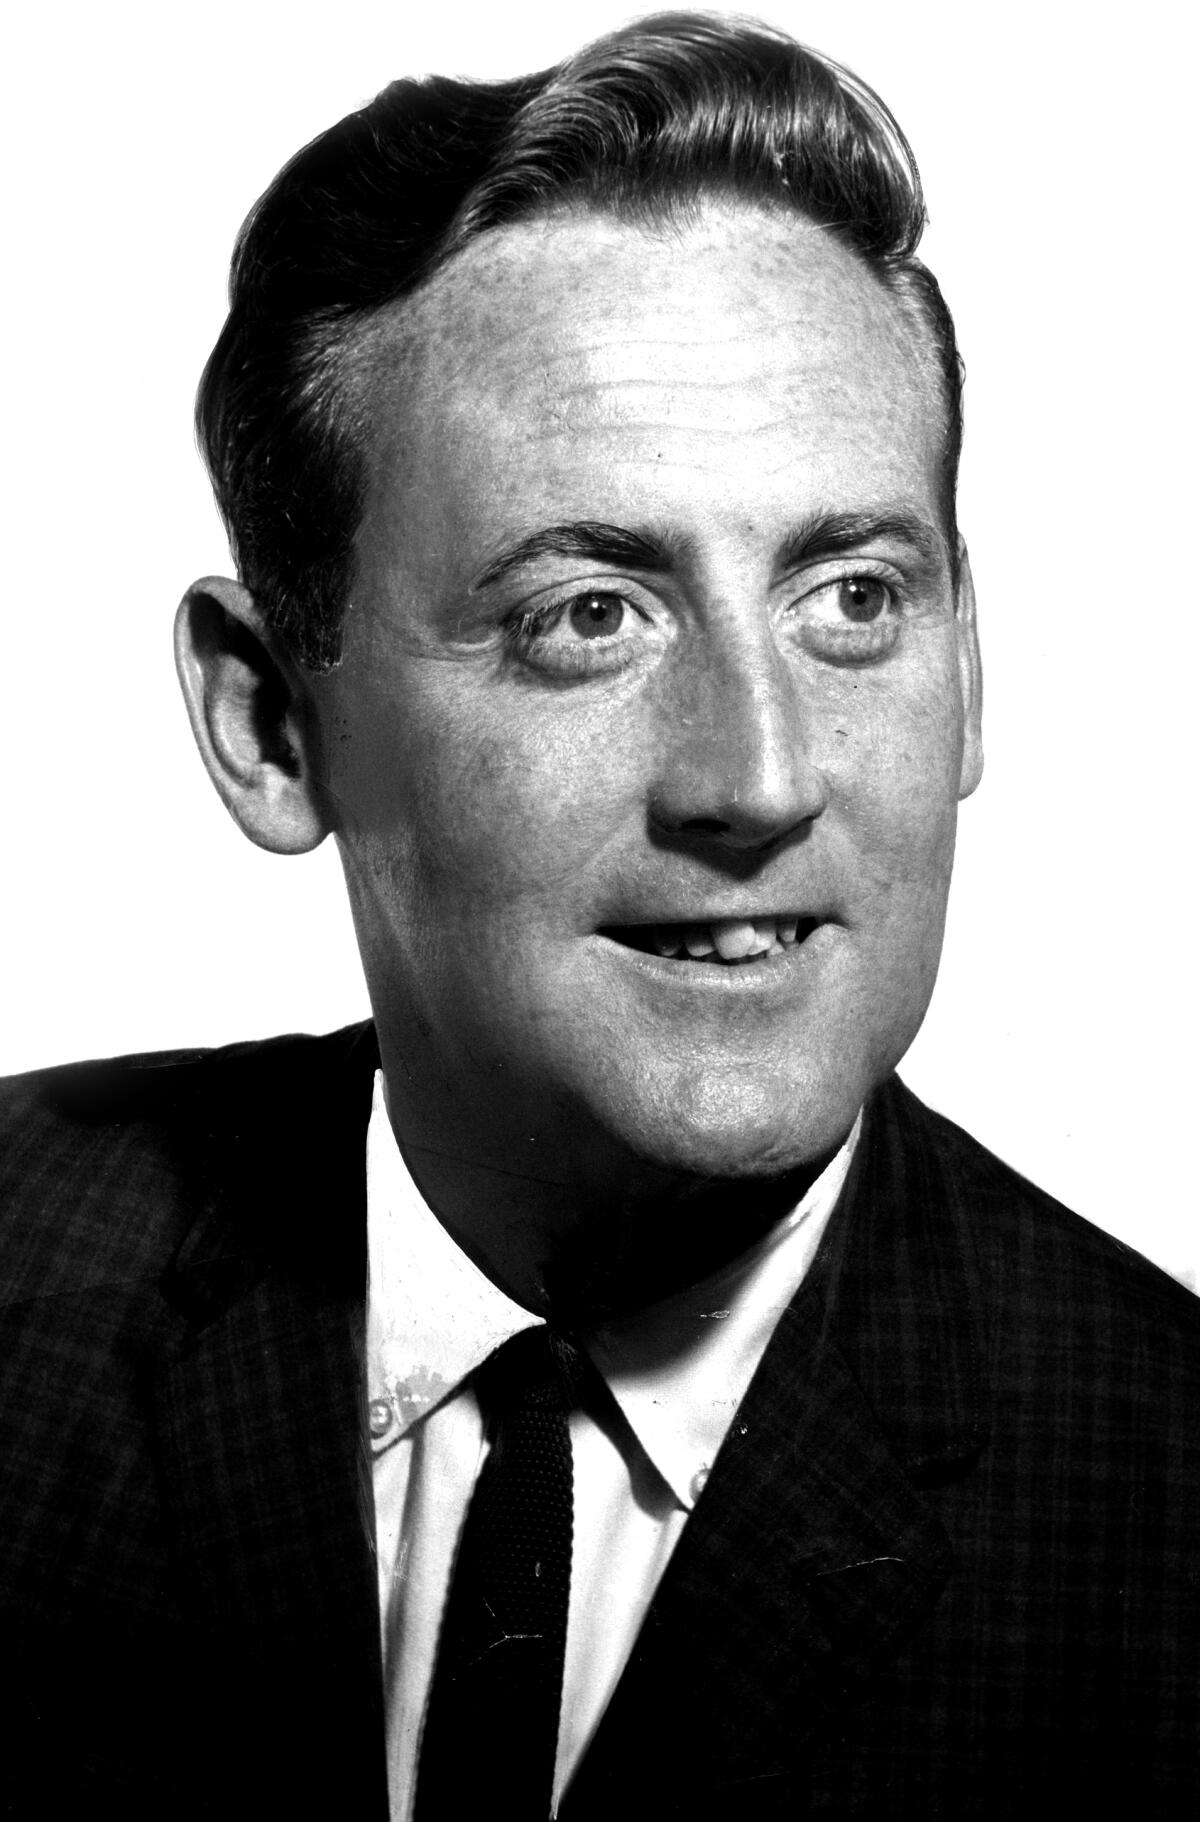 A headshot of a man in a suit and tie